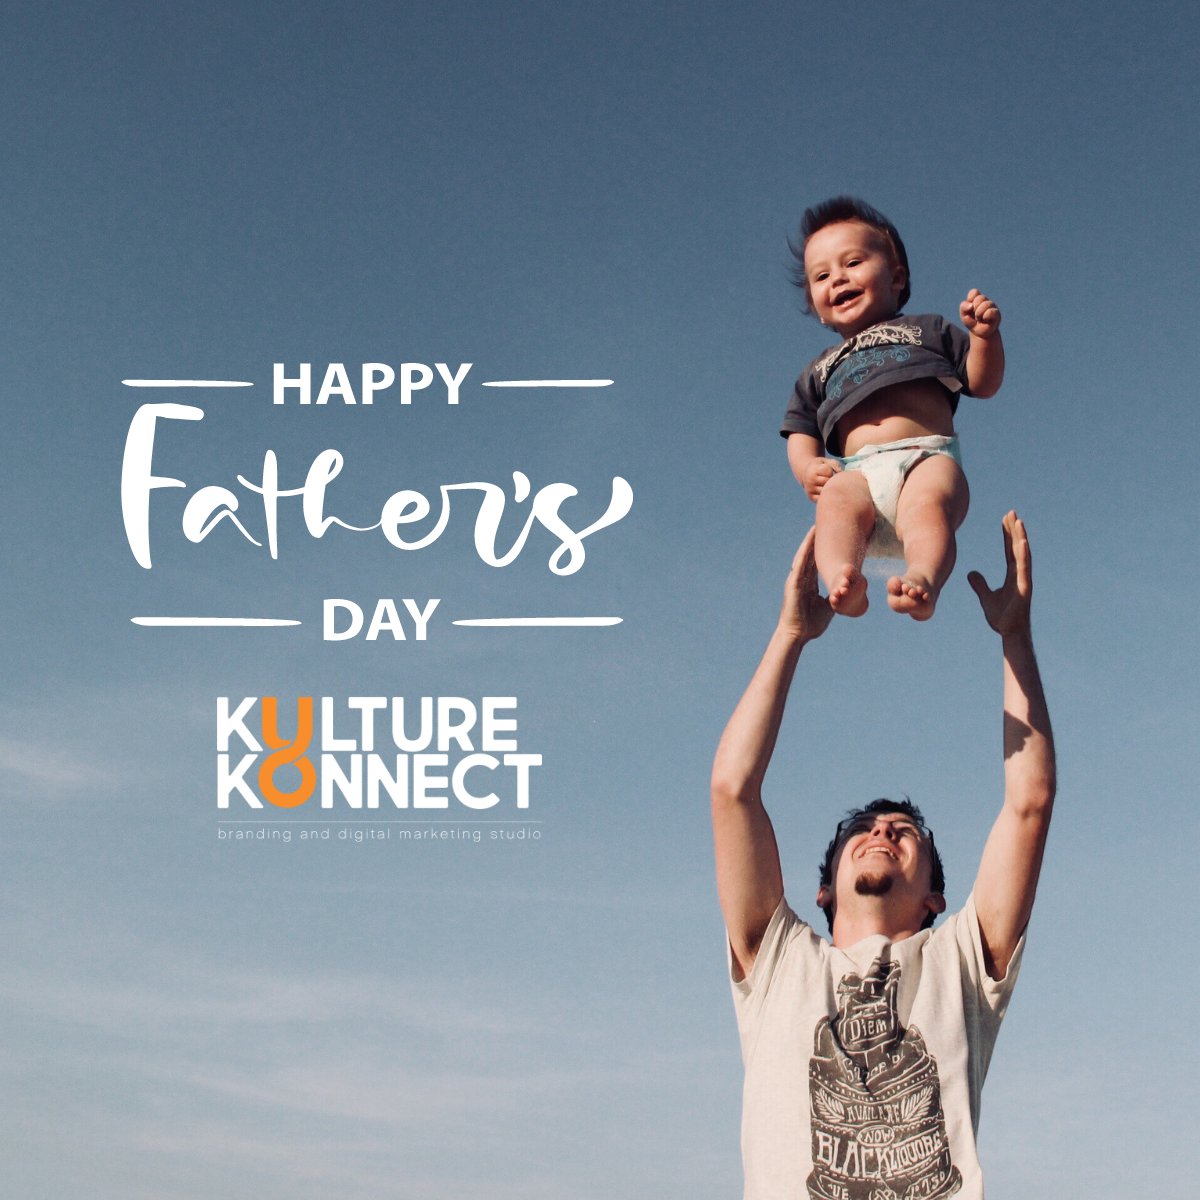 Wishing all the amazing fathers out there a Happy Father's Day!
#Fathersday #HappyFathersday #KultureKonnect